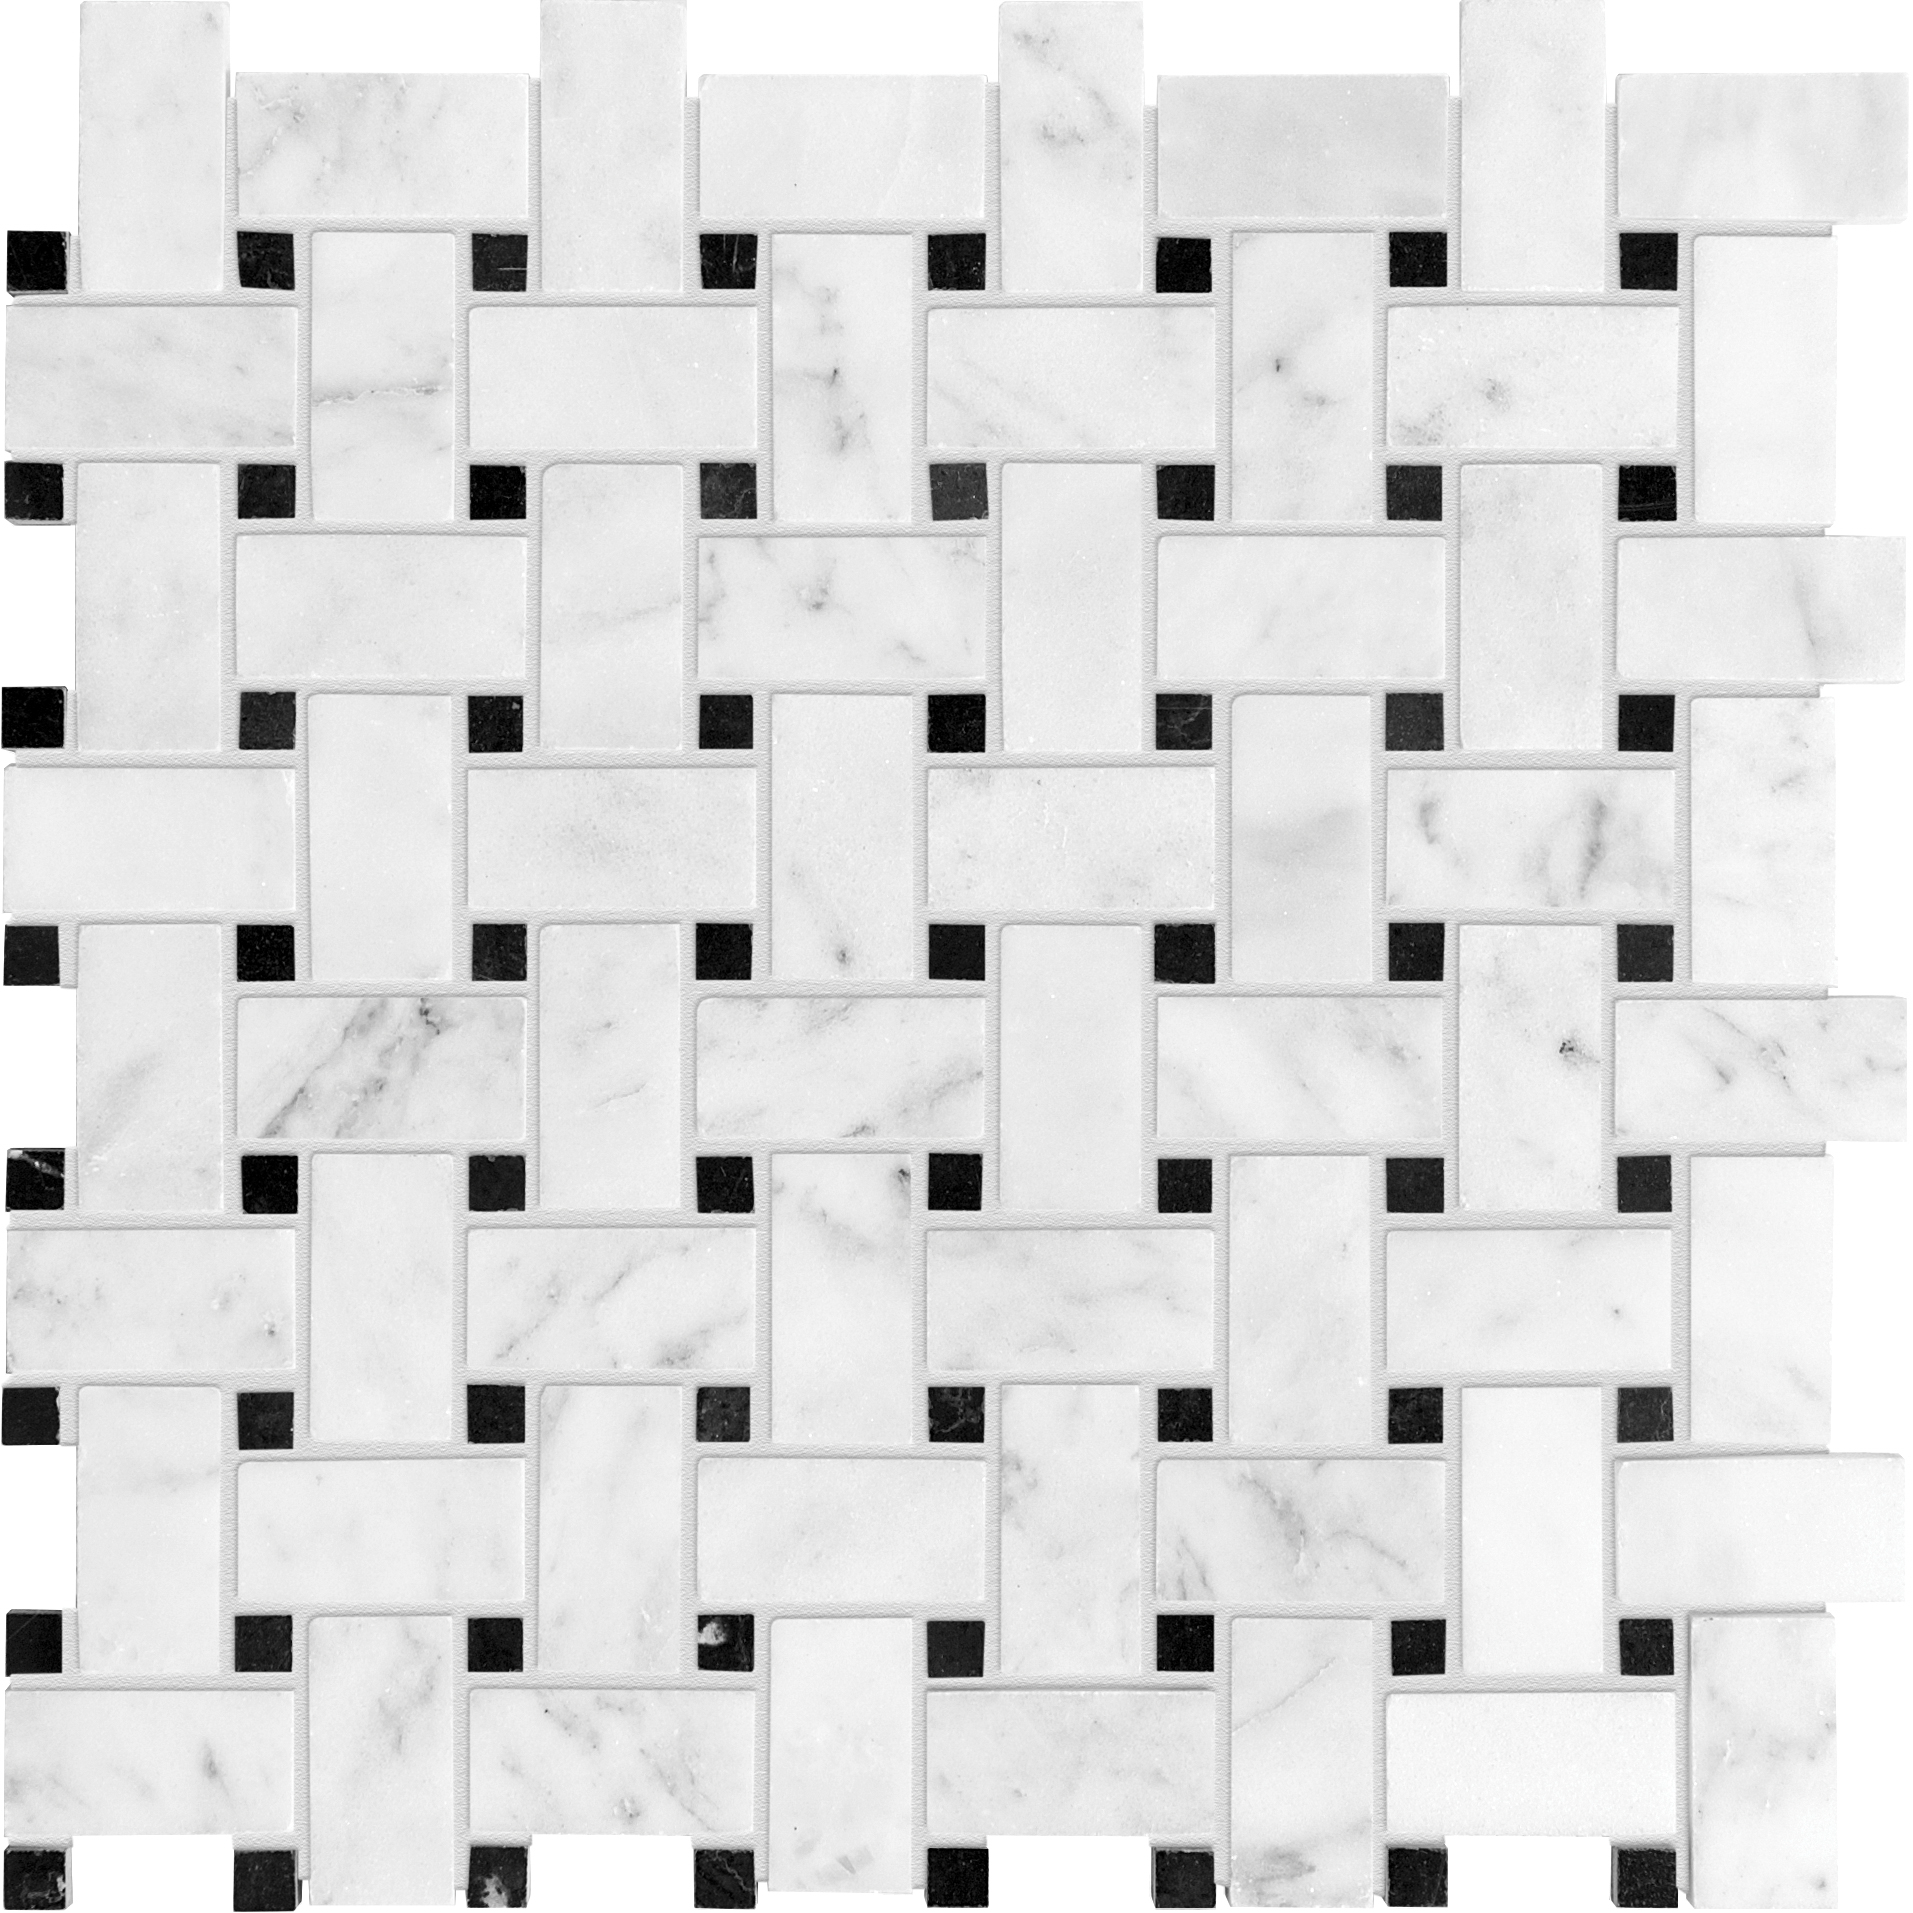 marble basketweave 2x2-inch pattern natural stone mosaic from bianco venatino anatolia collection distributed by surface group international polished finish straight edge edge mesh shape